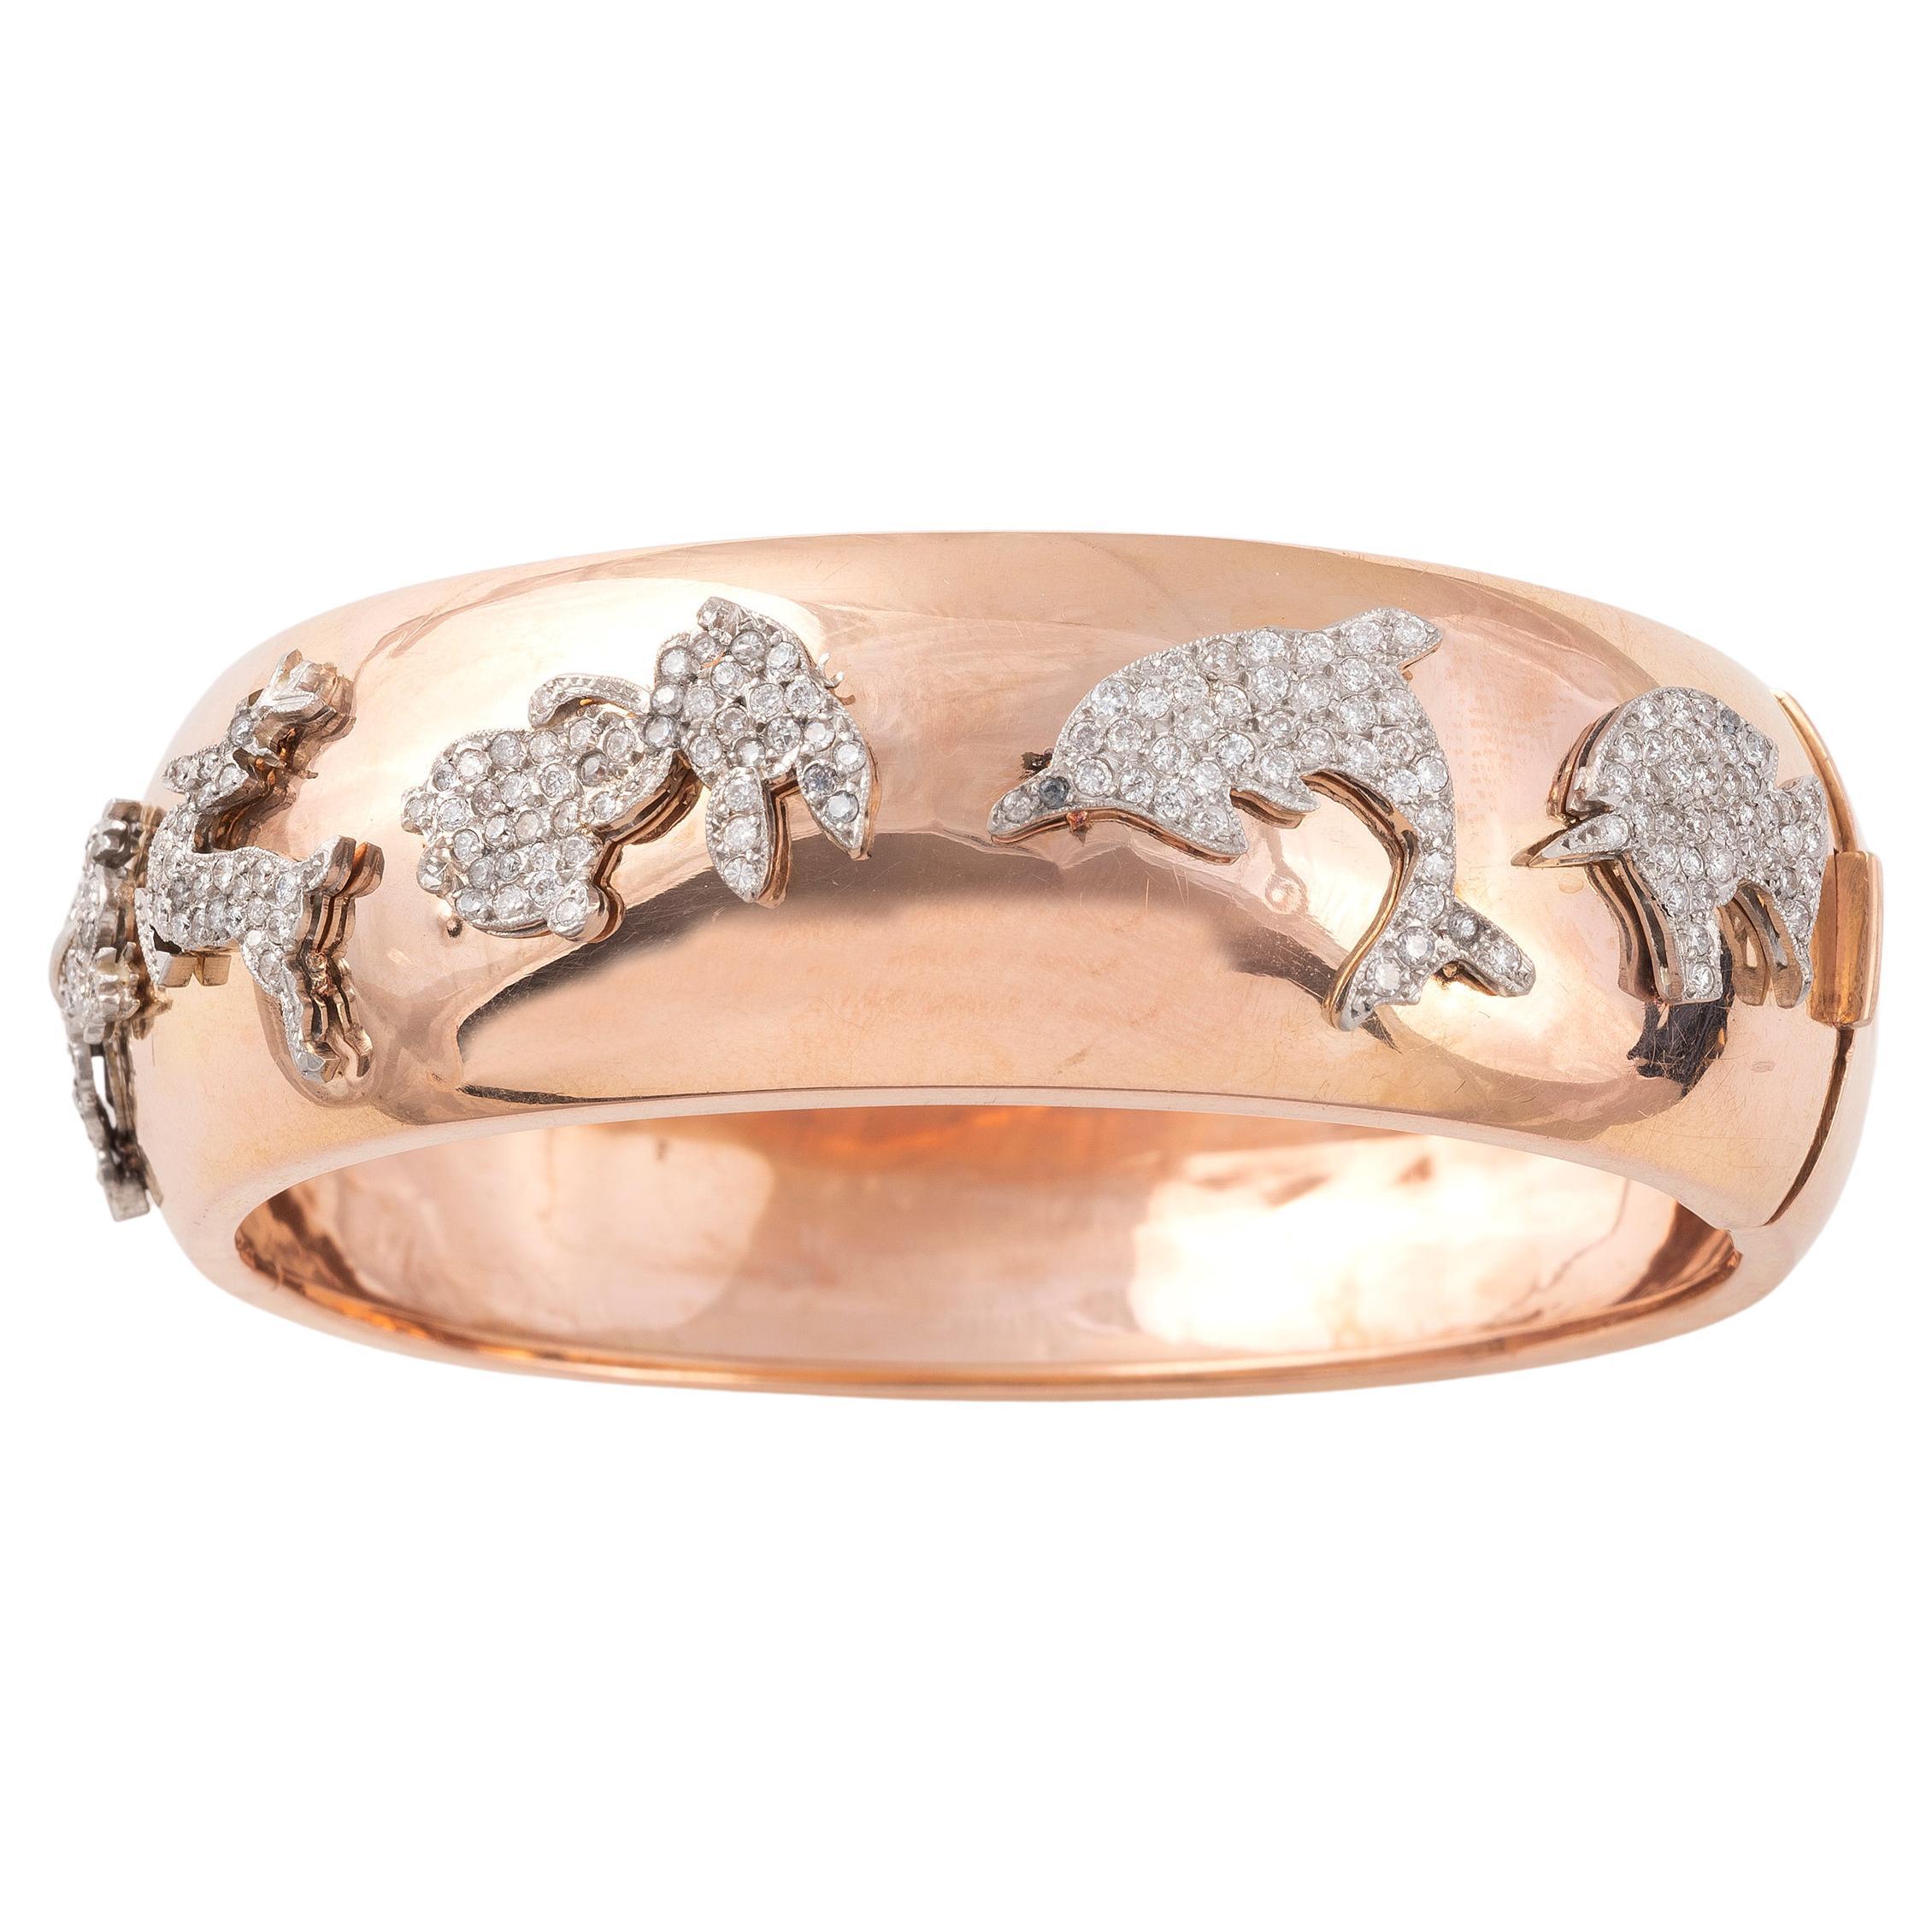 The wide, gold bangle bracelet top featuring five platinum art deco charms, in the animal form, size: 6 3/4in
Wide :22mm
Weight: 28.5gr.
